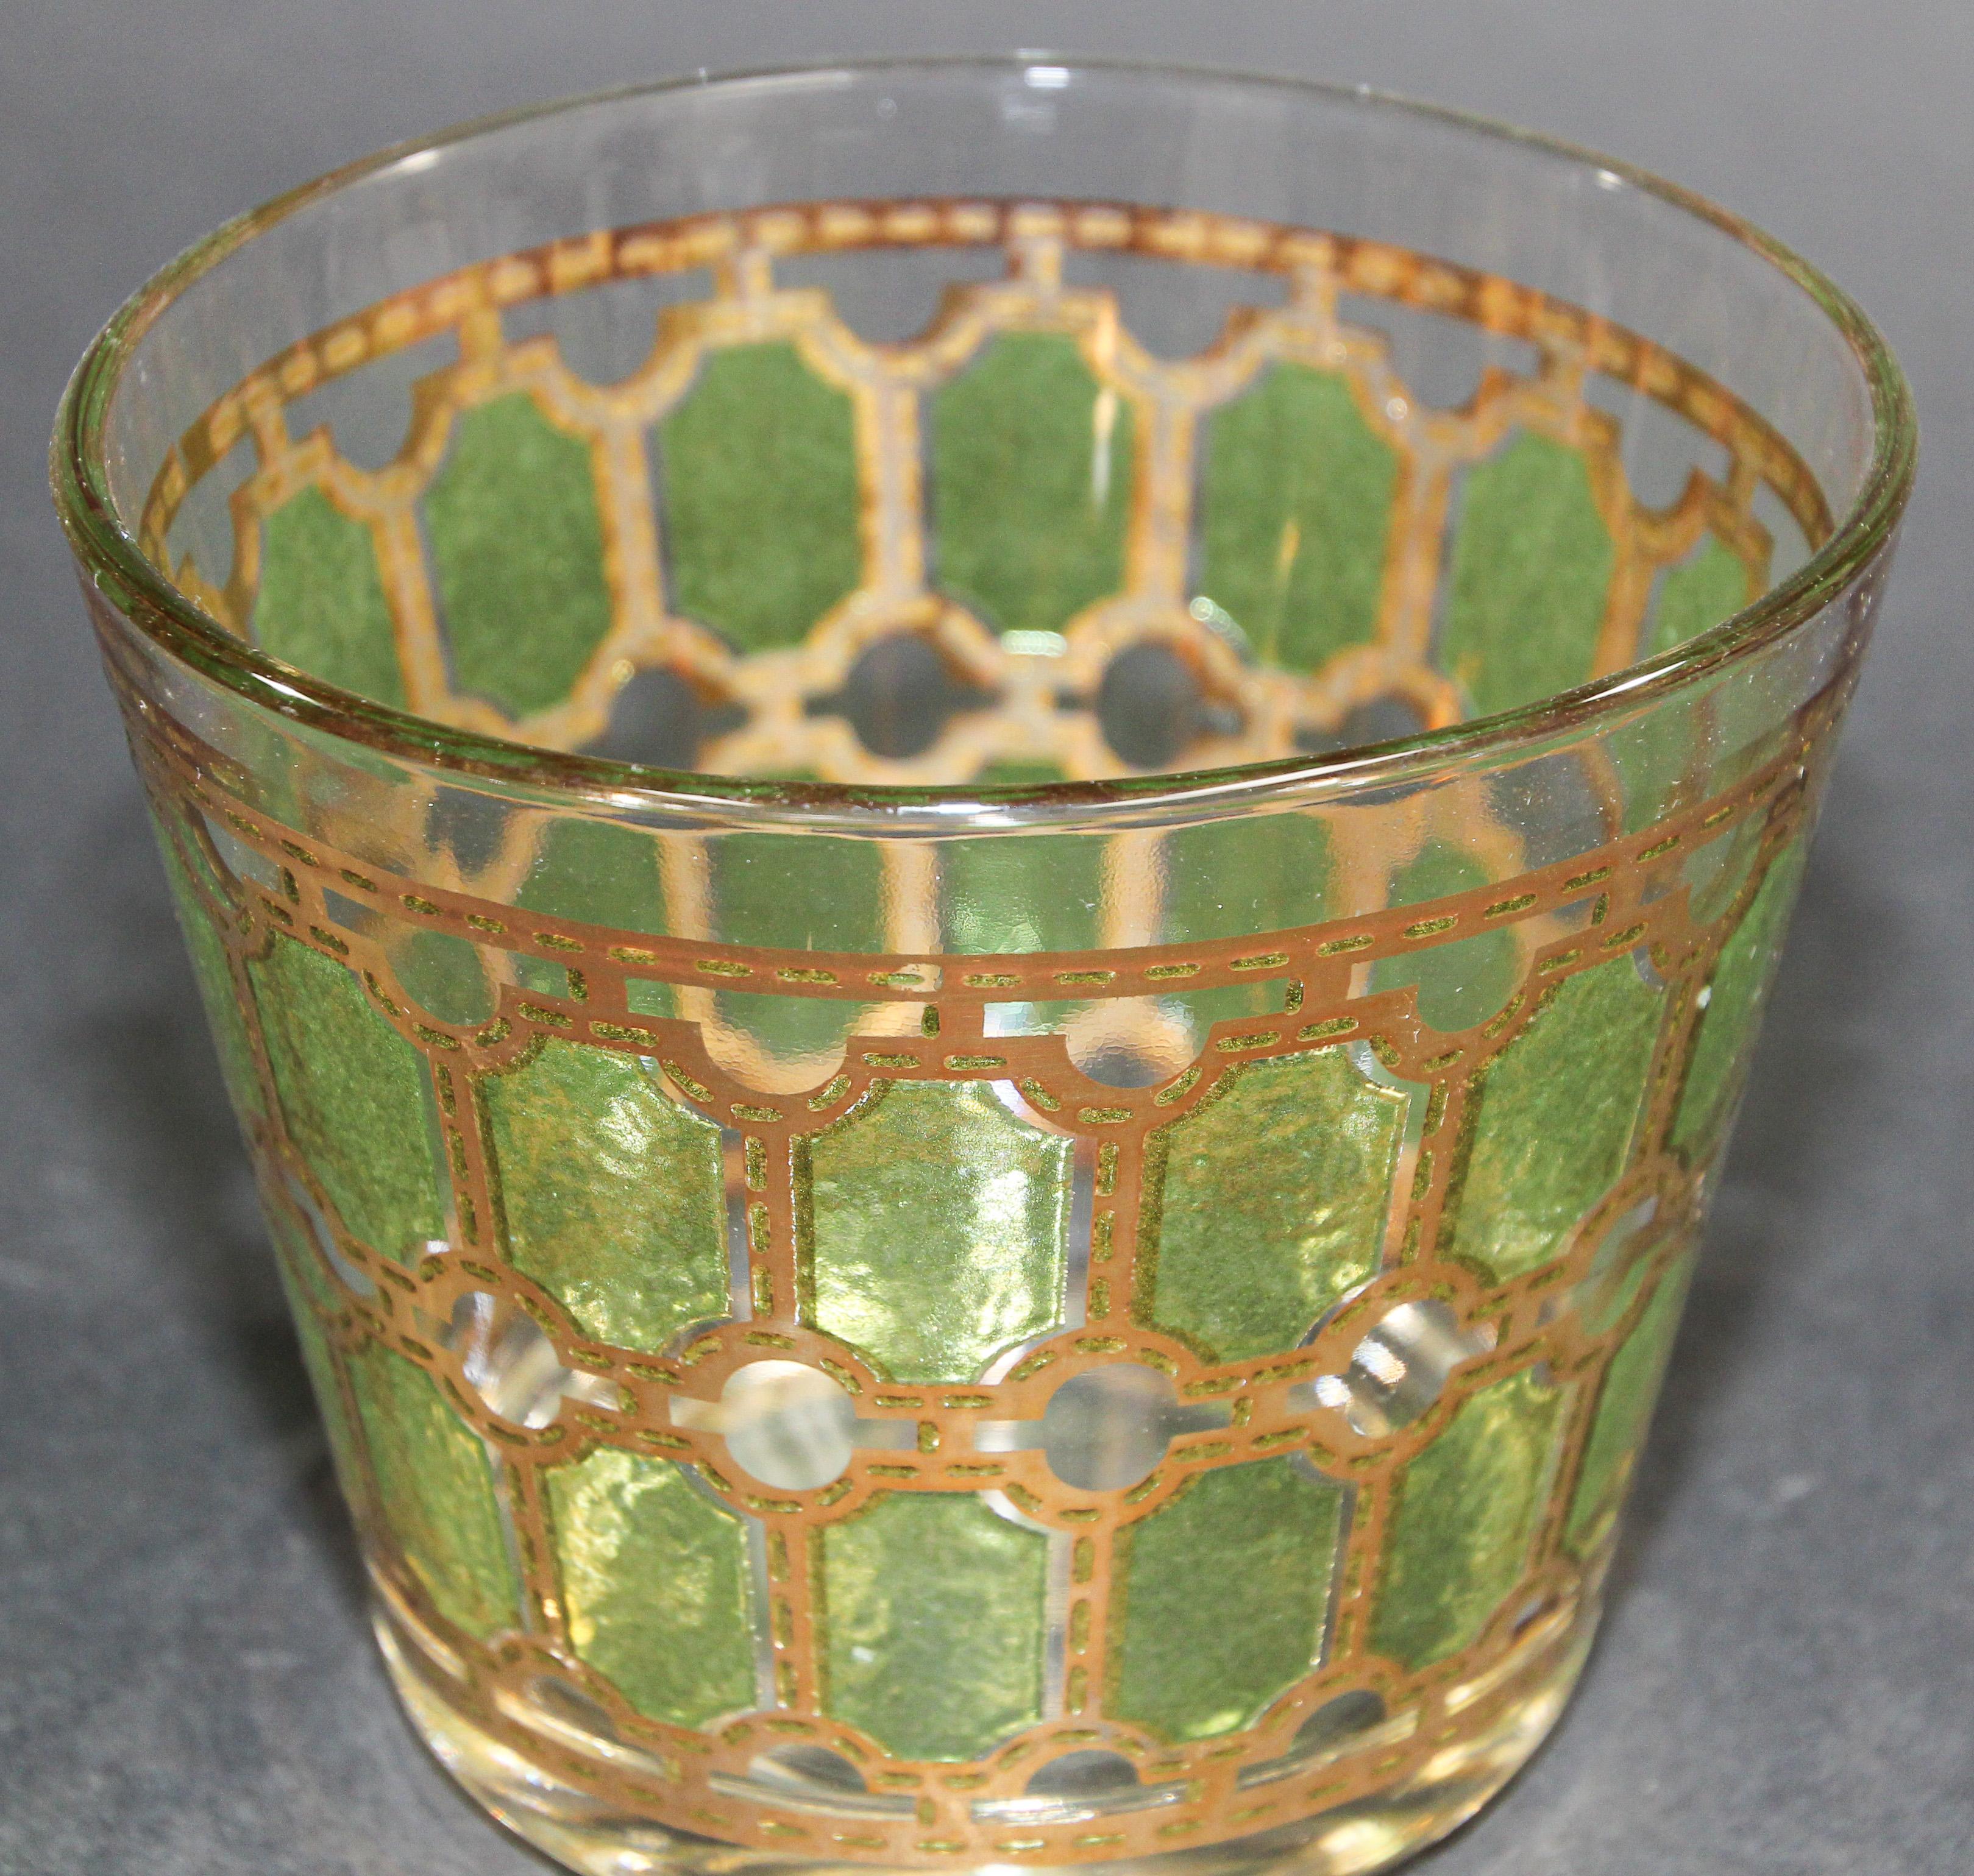 Appliqué Vintage Midcentury Green and Gold Ice Bucket 1960s